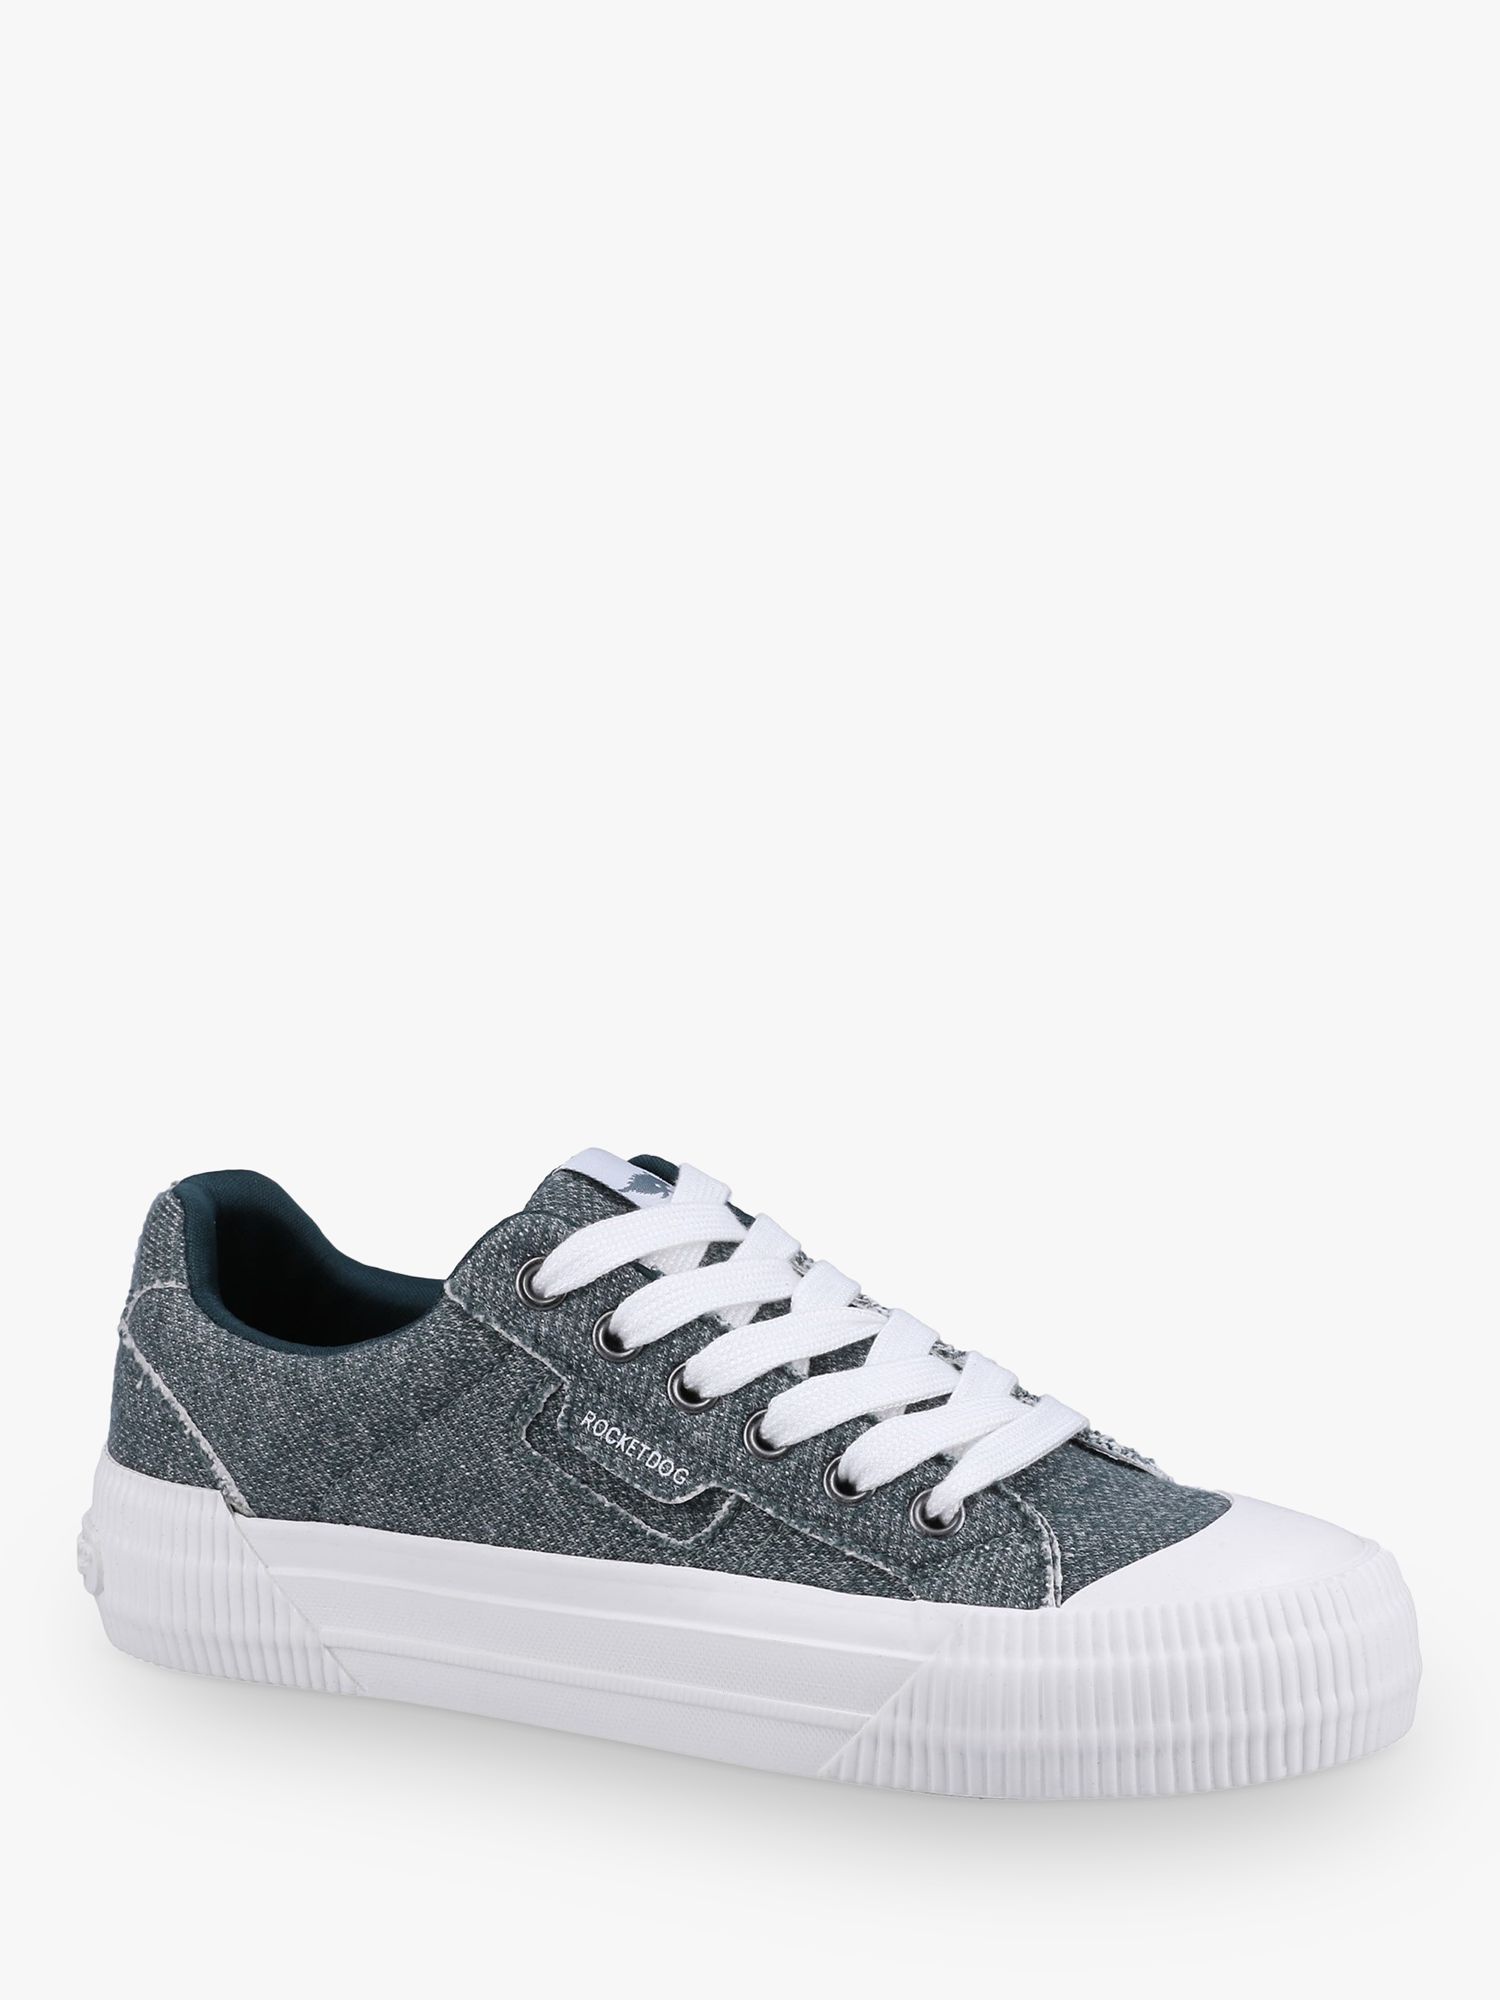 Rocket Dog Cheery Skirball Jersey Lace Up Trainers, Moss at John Lewis ...